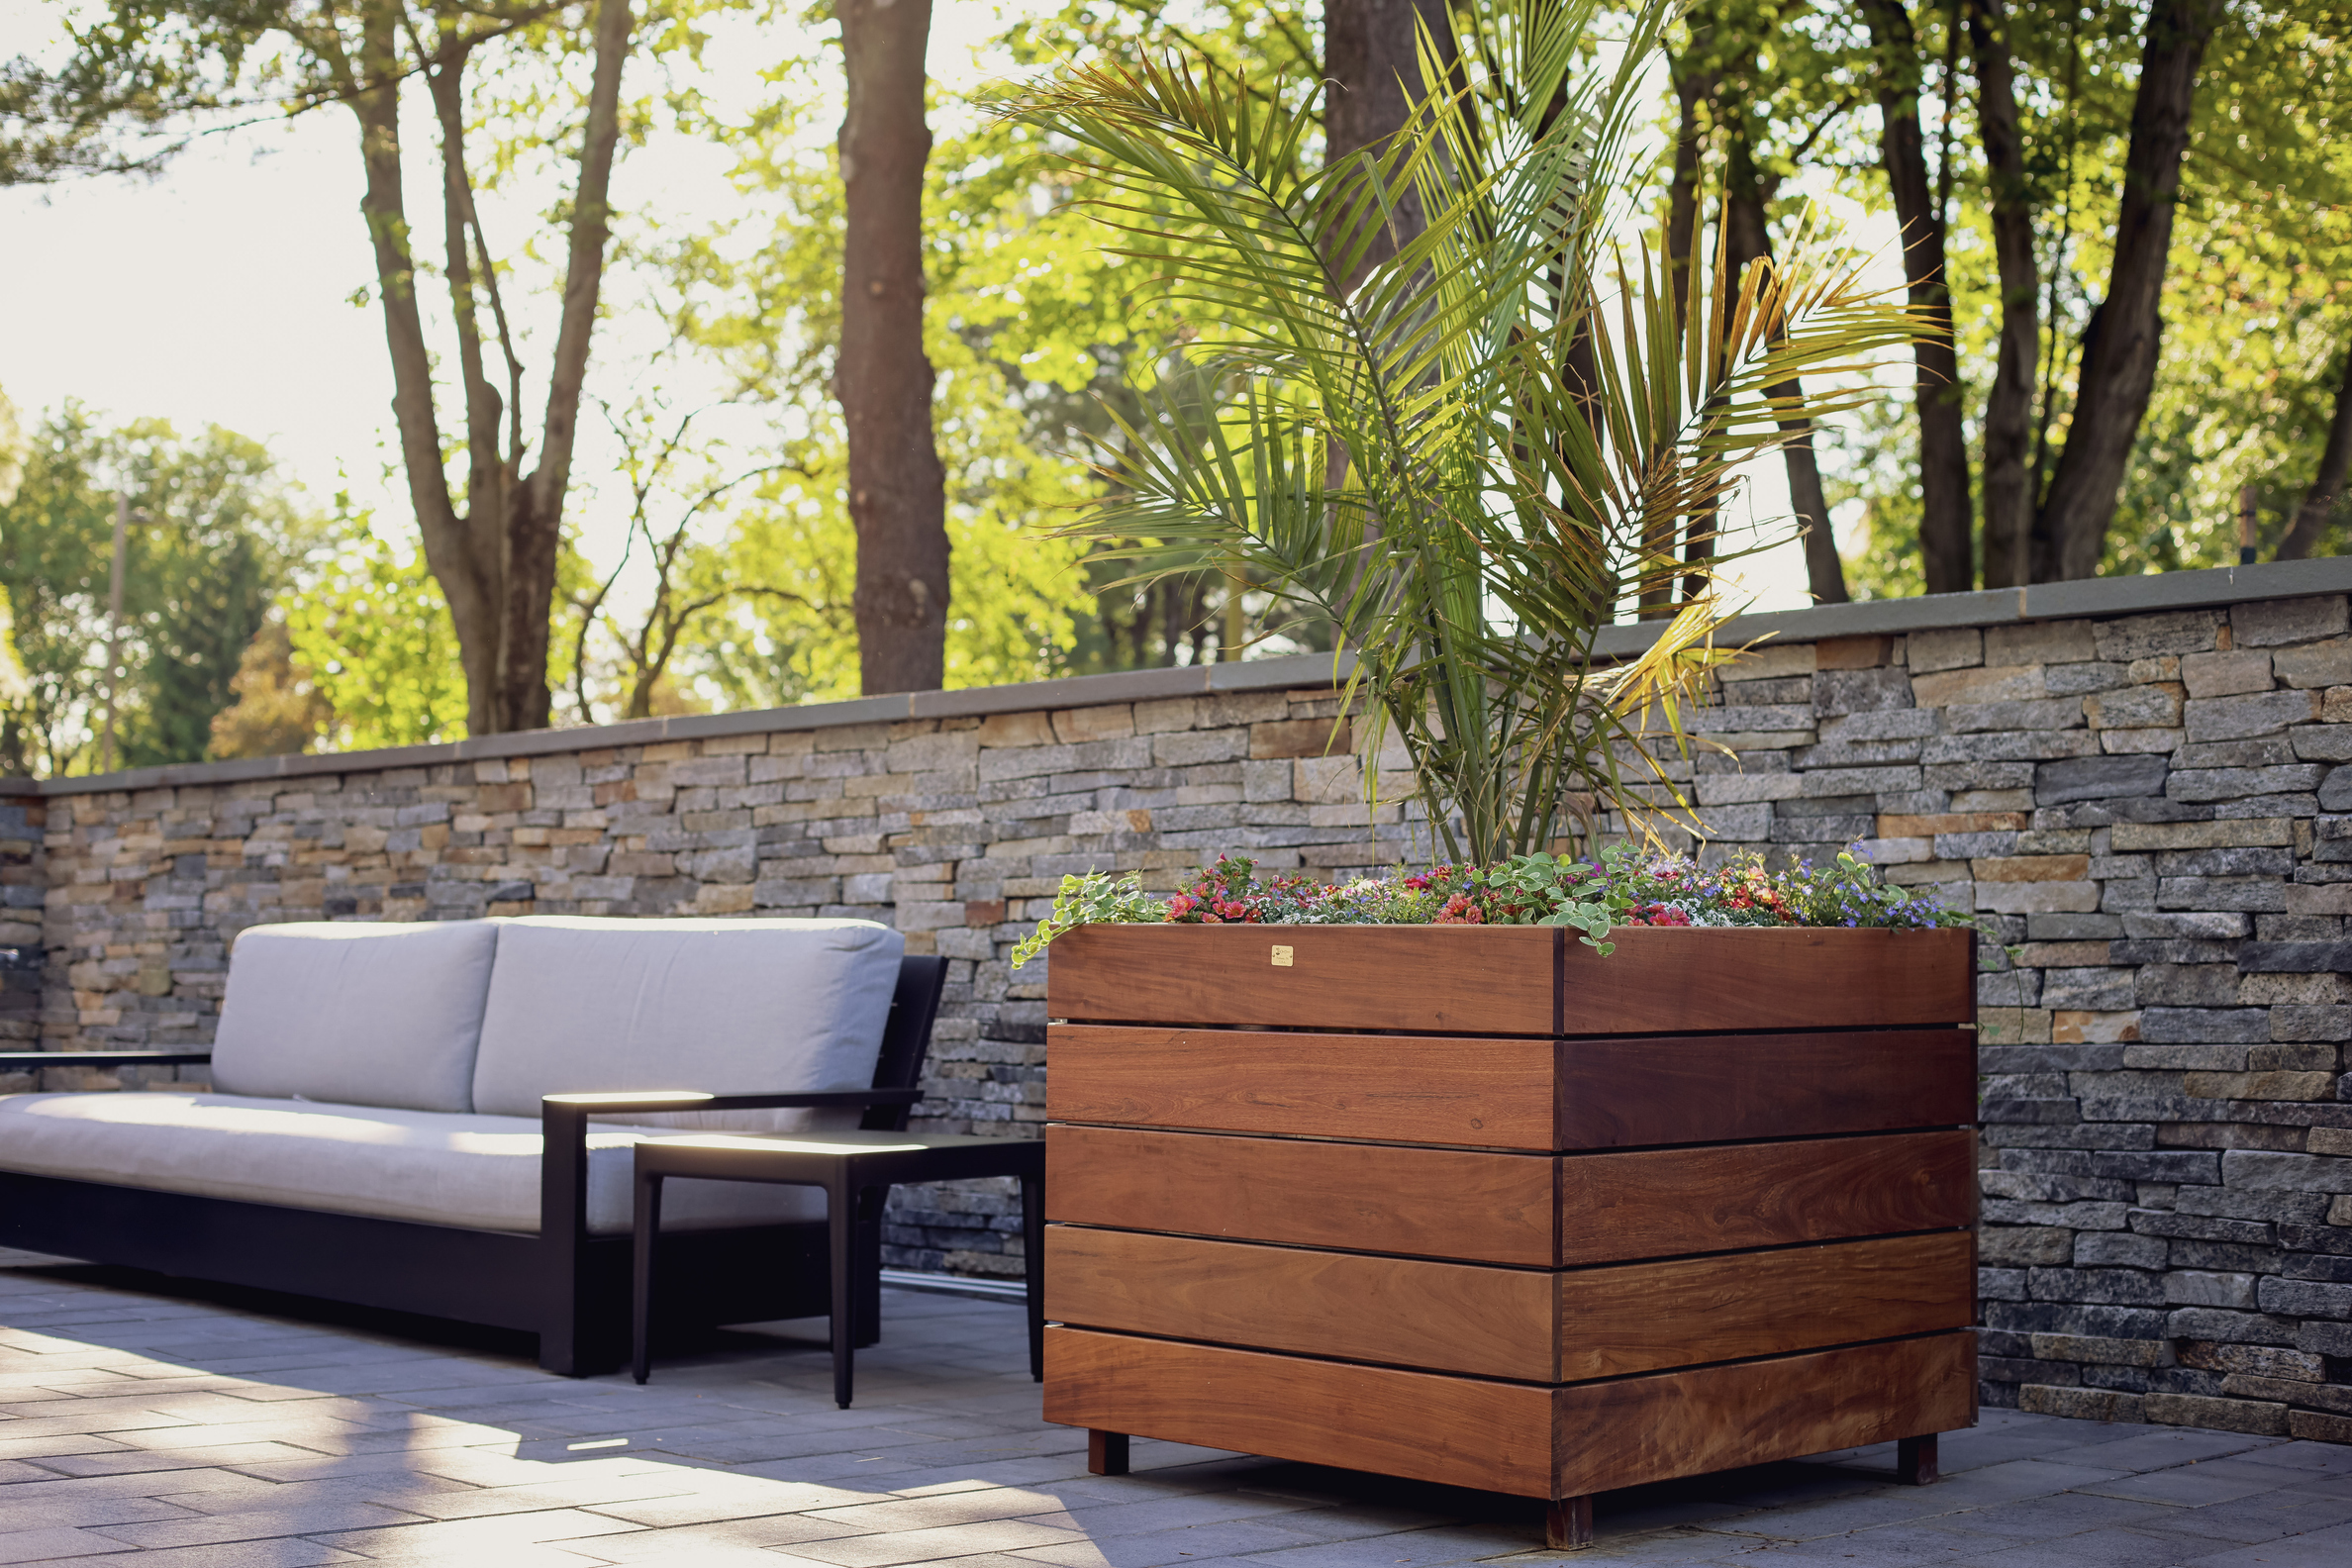 You are currently viewing Ipe Wood: Preferred for Outdoor Furnishing Designs